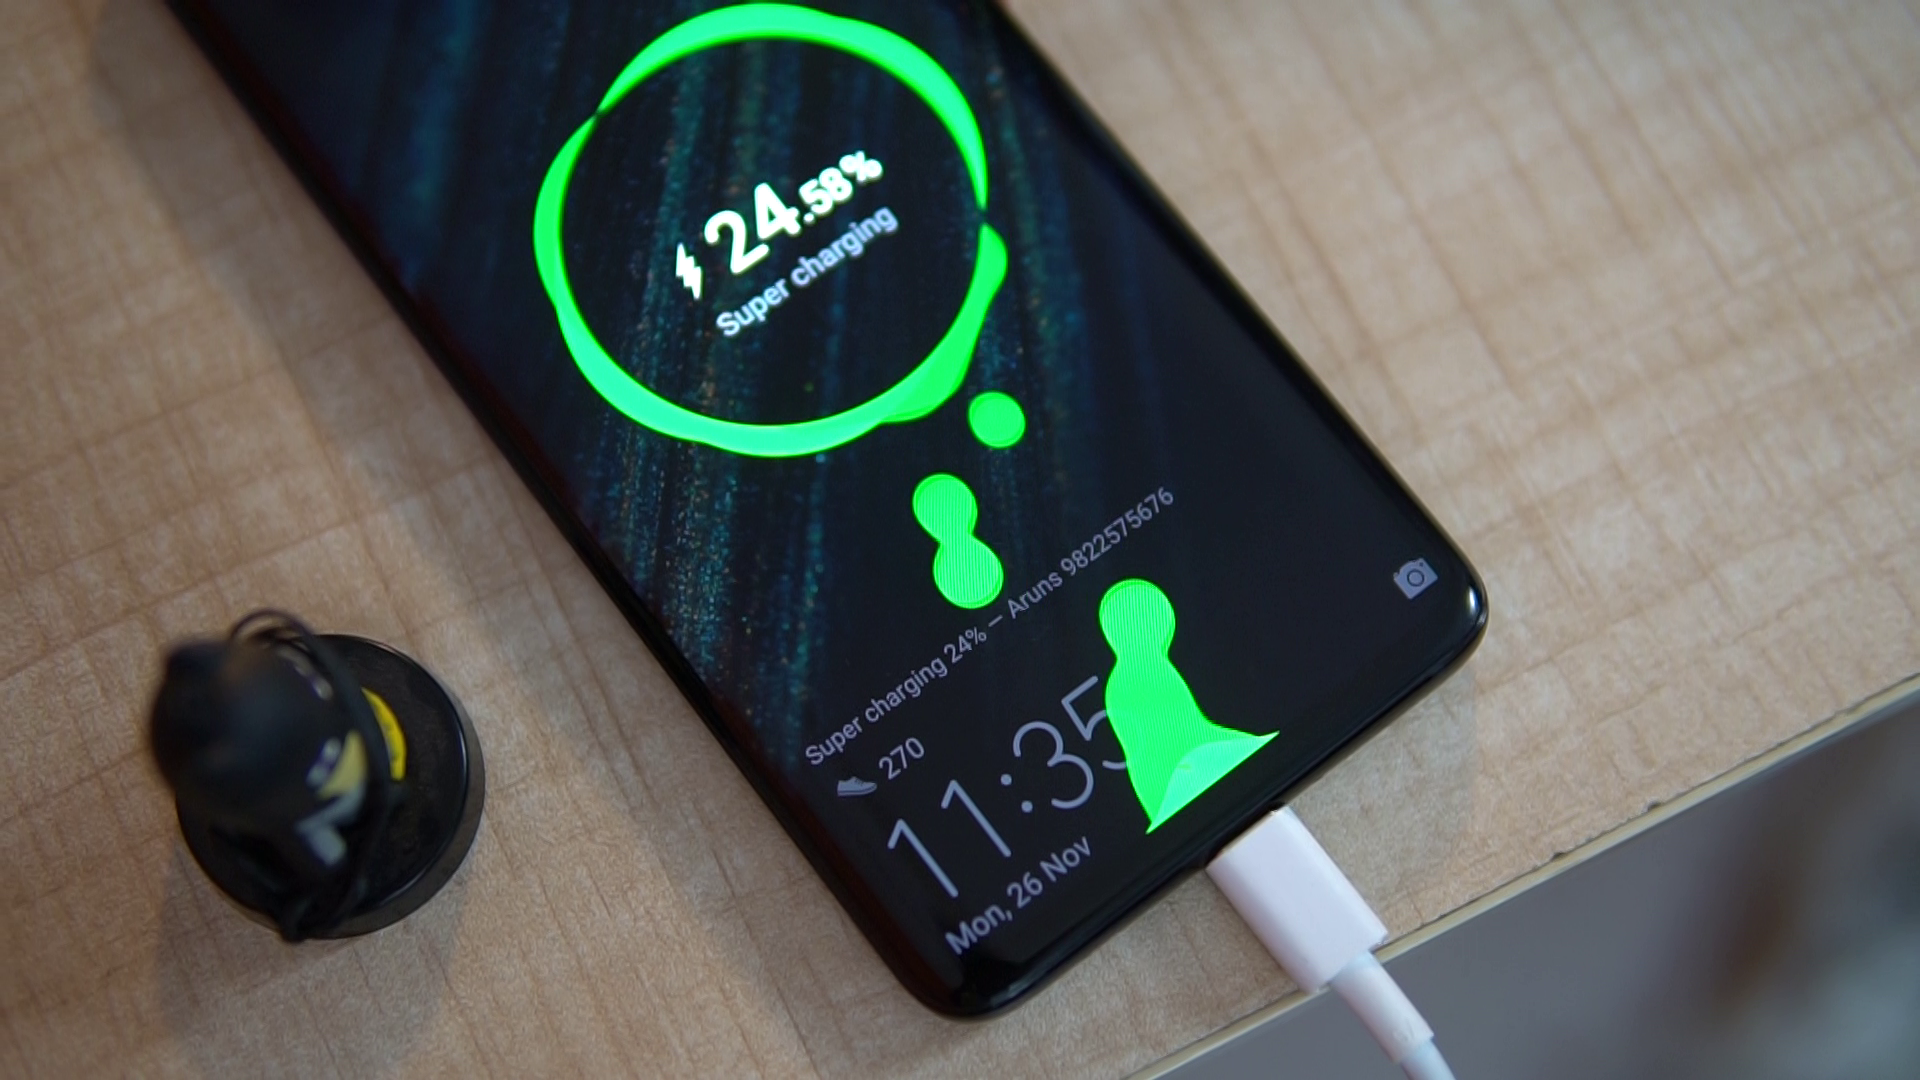 Wireless charging from Huawei Mate 20 Pro